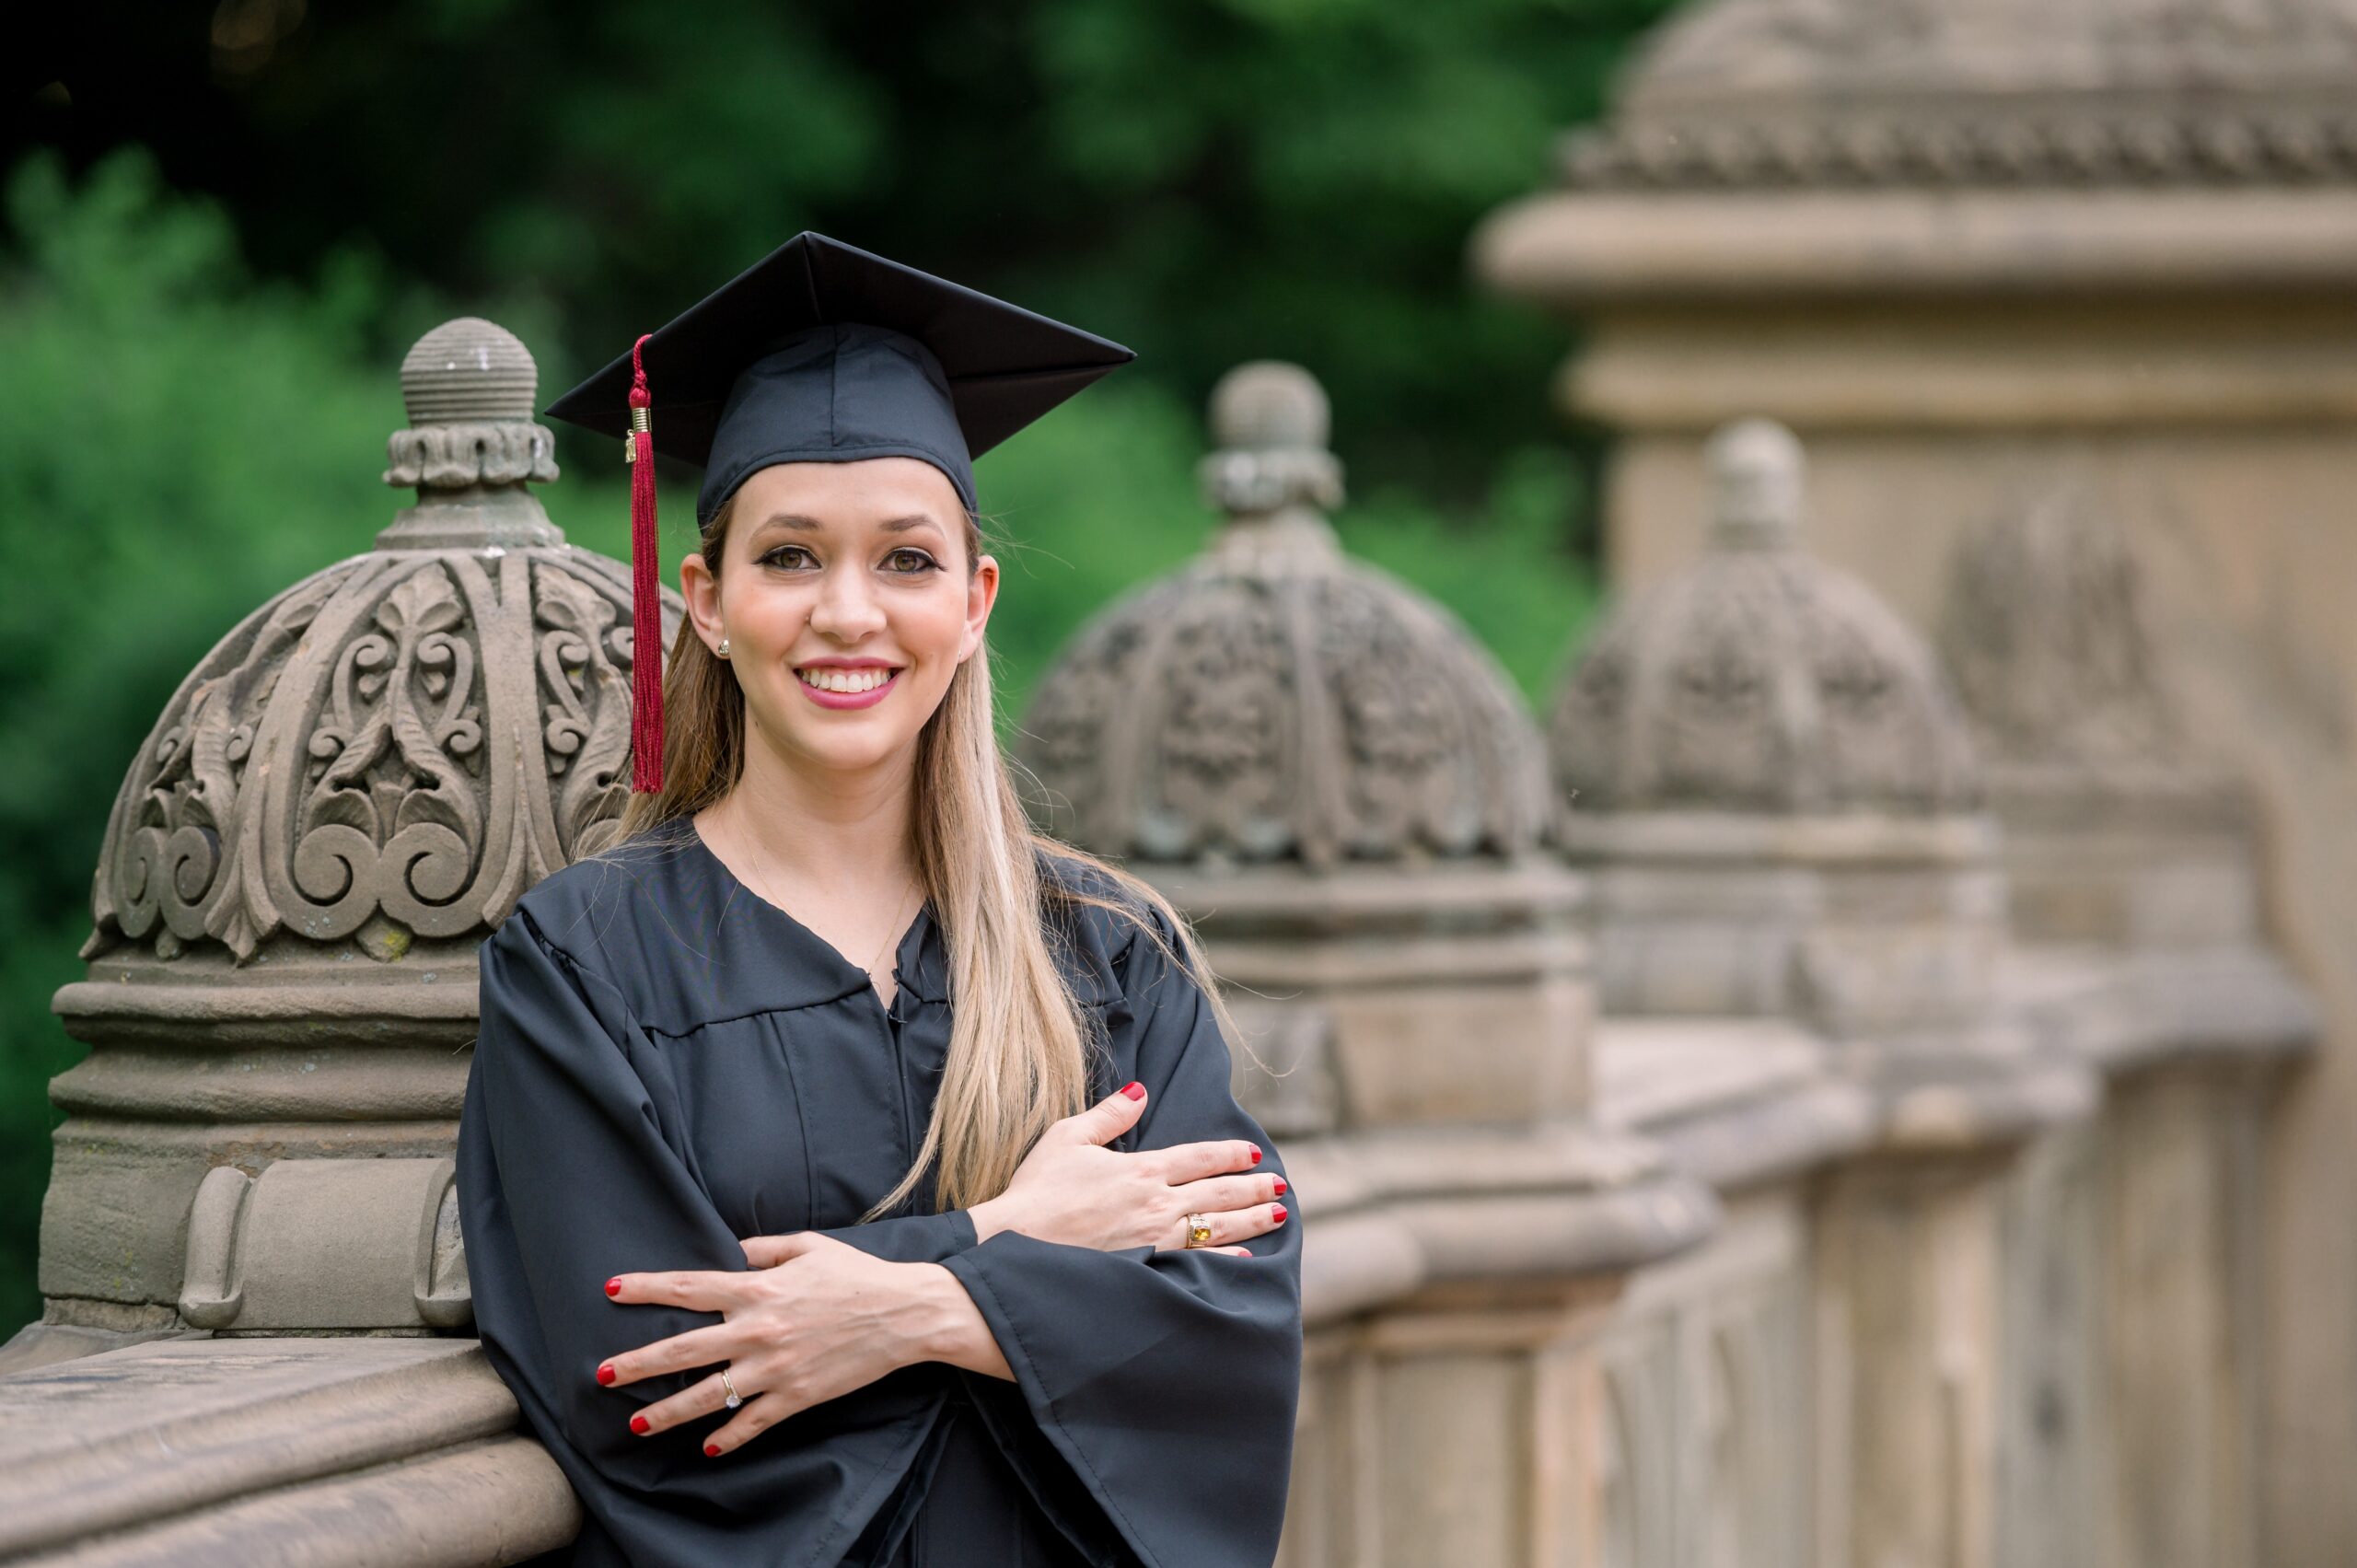 Jenniffer Sánchez graduated with her master's degree from CUNY after difficulty validating her foreign degree. Now she has created a program to simplify the process for others.